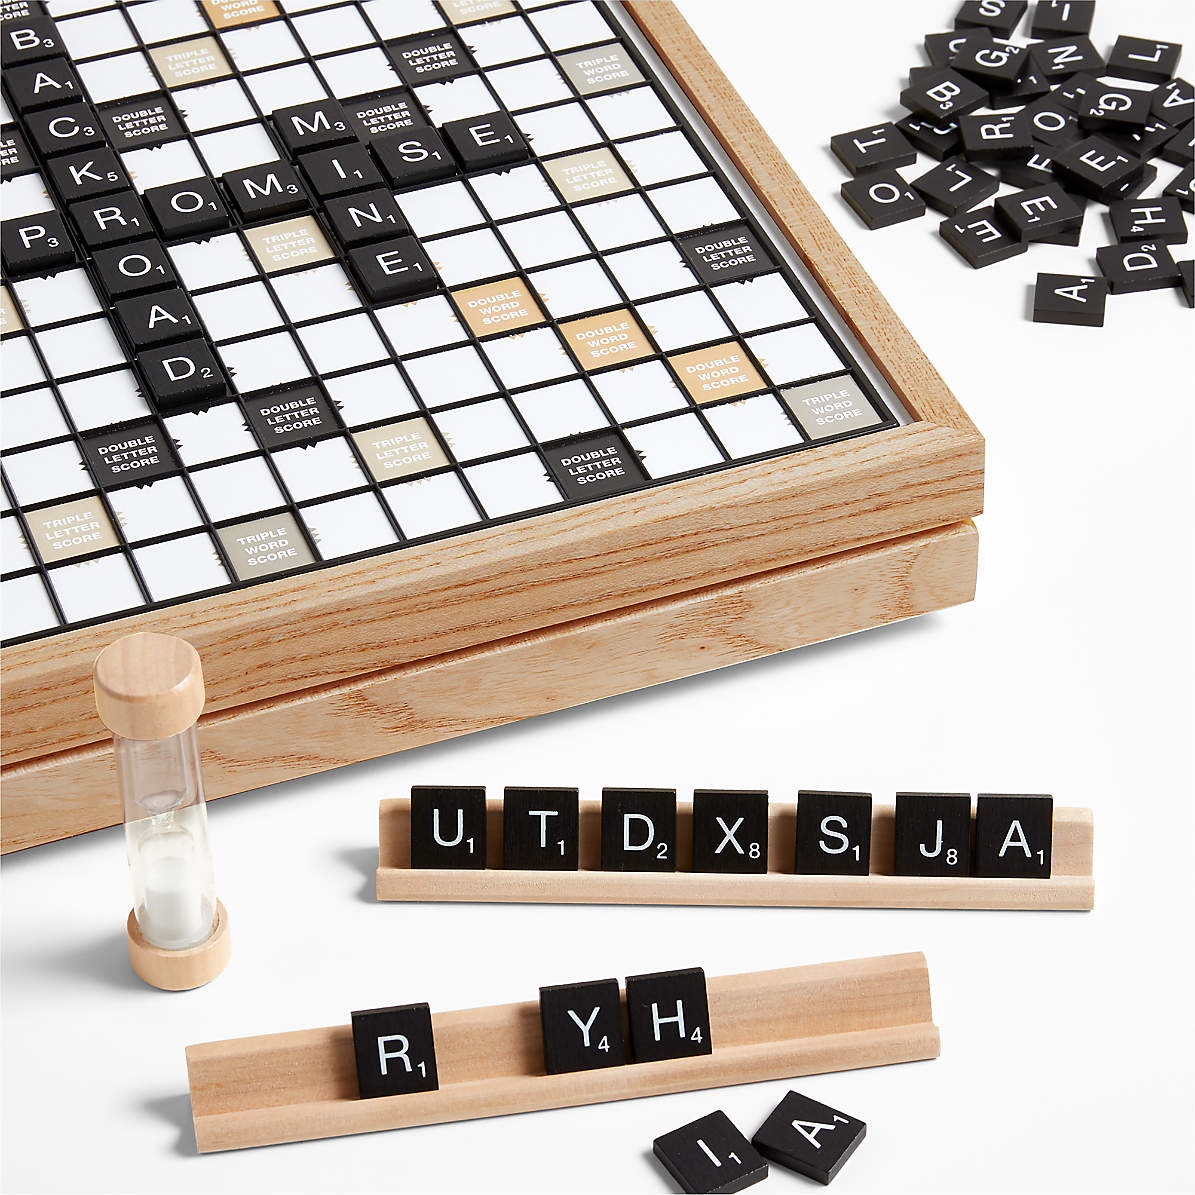 Scrabble Deluxe Designer Edition Is The Latest Must-Have Game Set